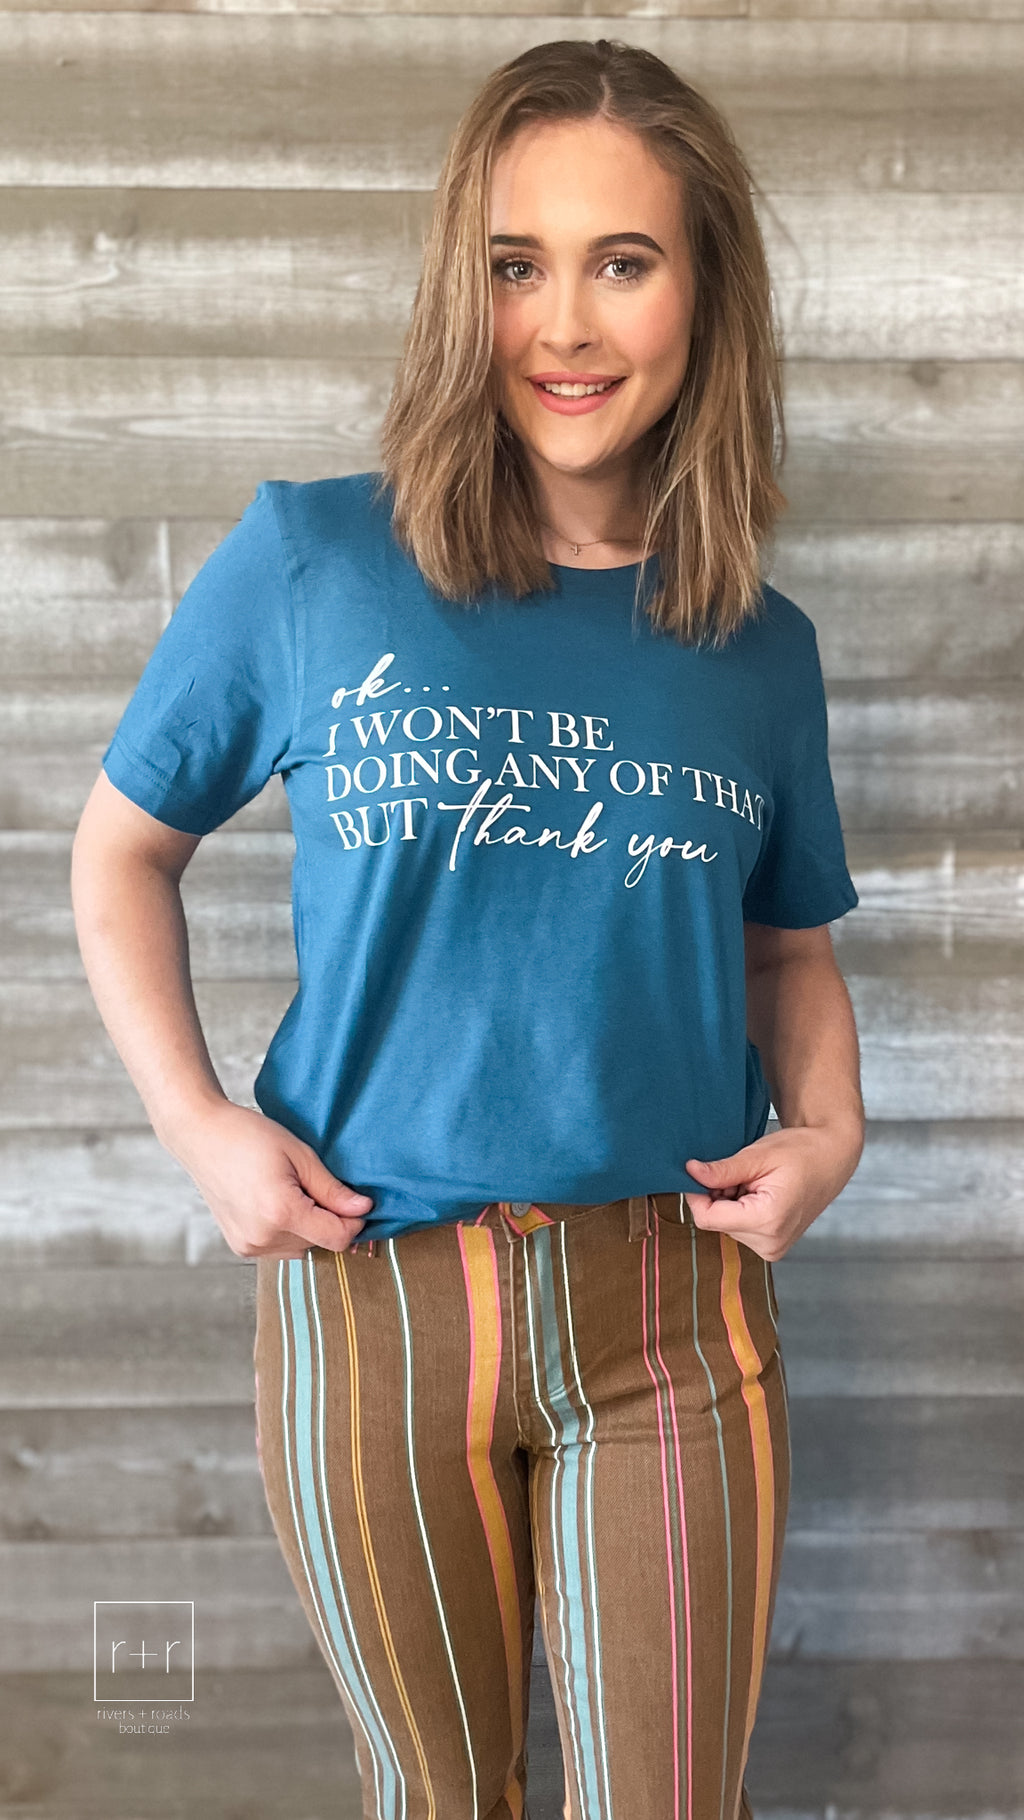 okay....I WON'T BE DOING ANY OF THAT BUT thank you. show your sassy side with this teal graphic tee with one of the iconic alexis rose quotes from schitt's creek!